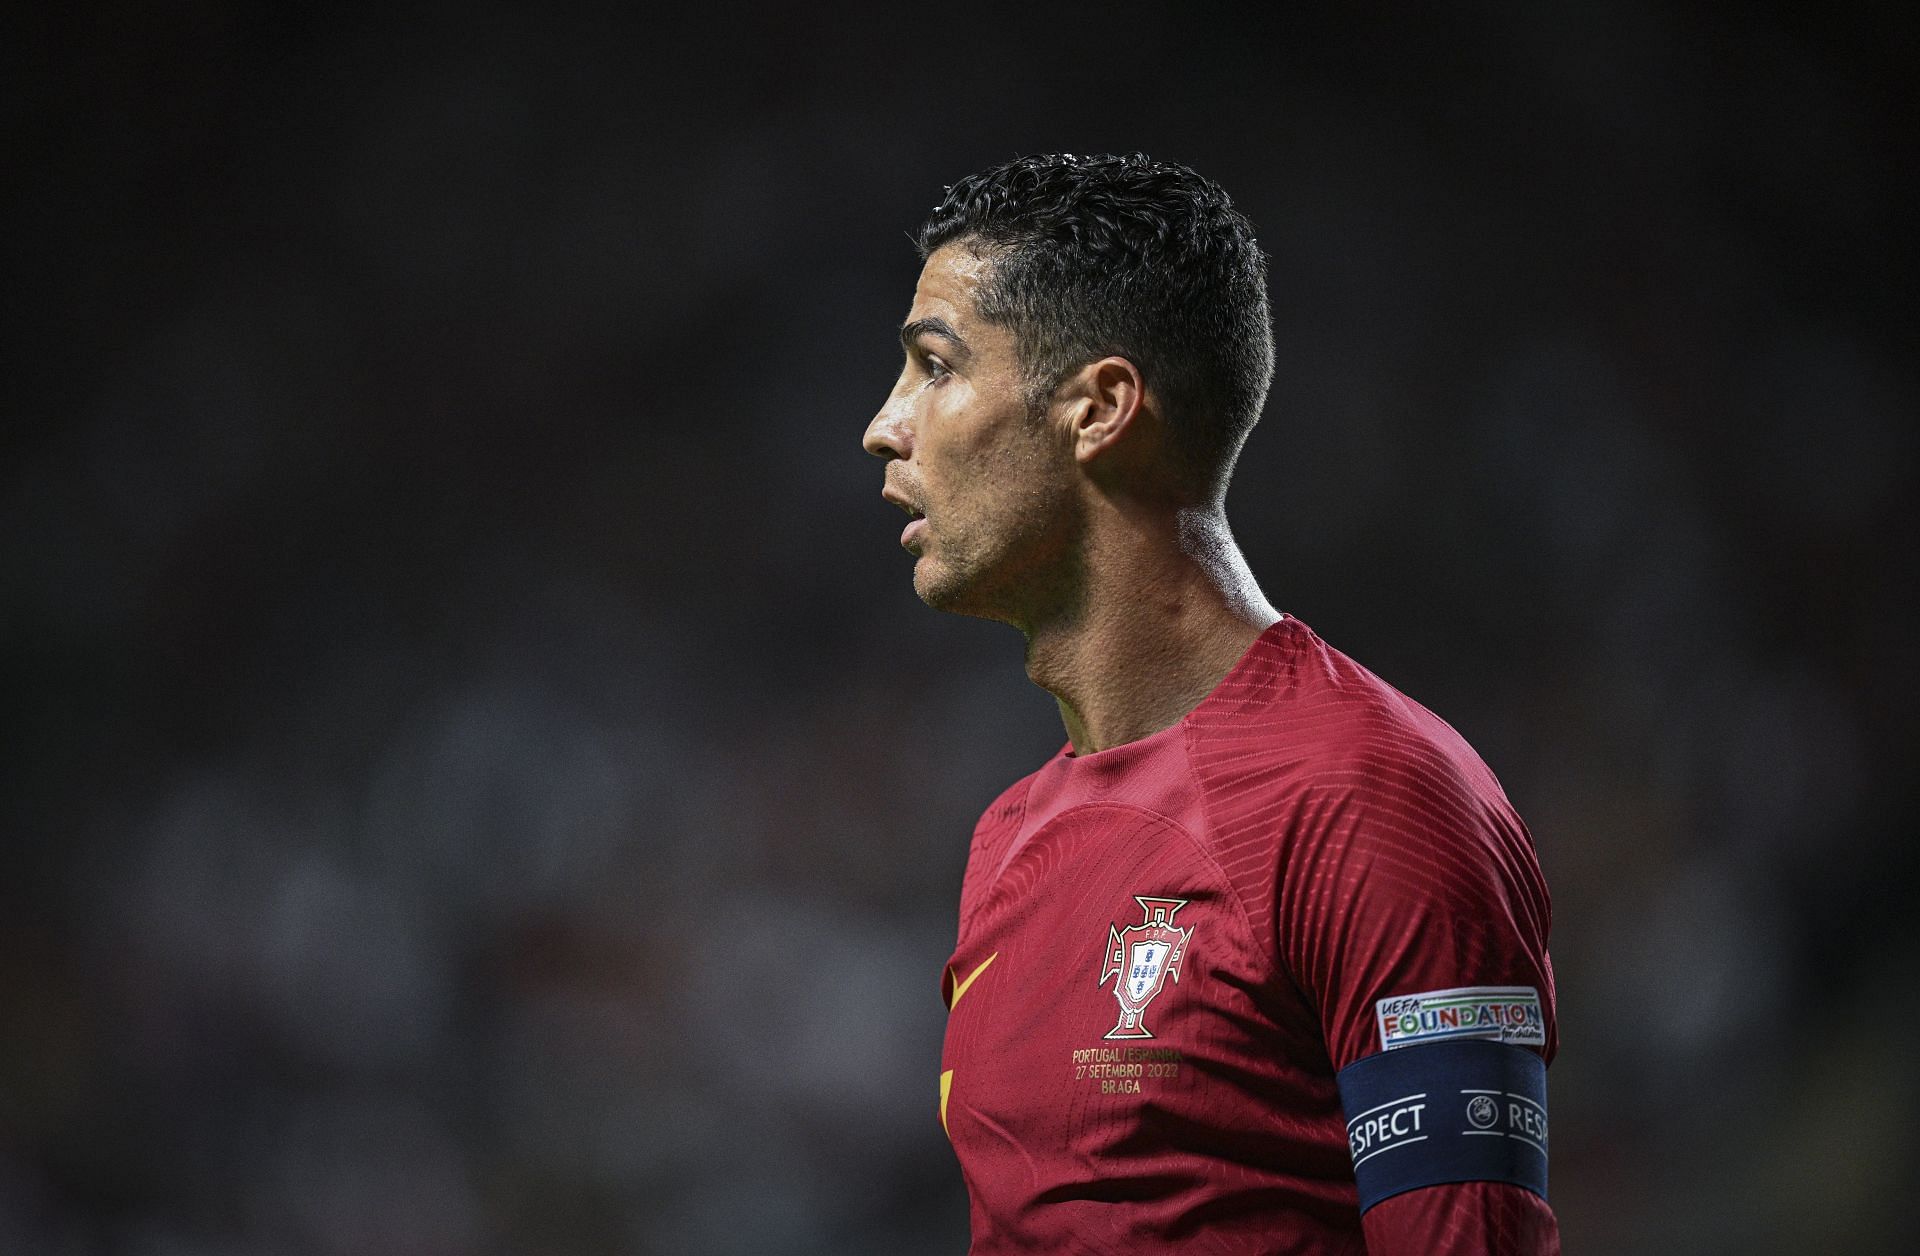 Ronaldo to play into his forties